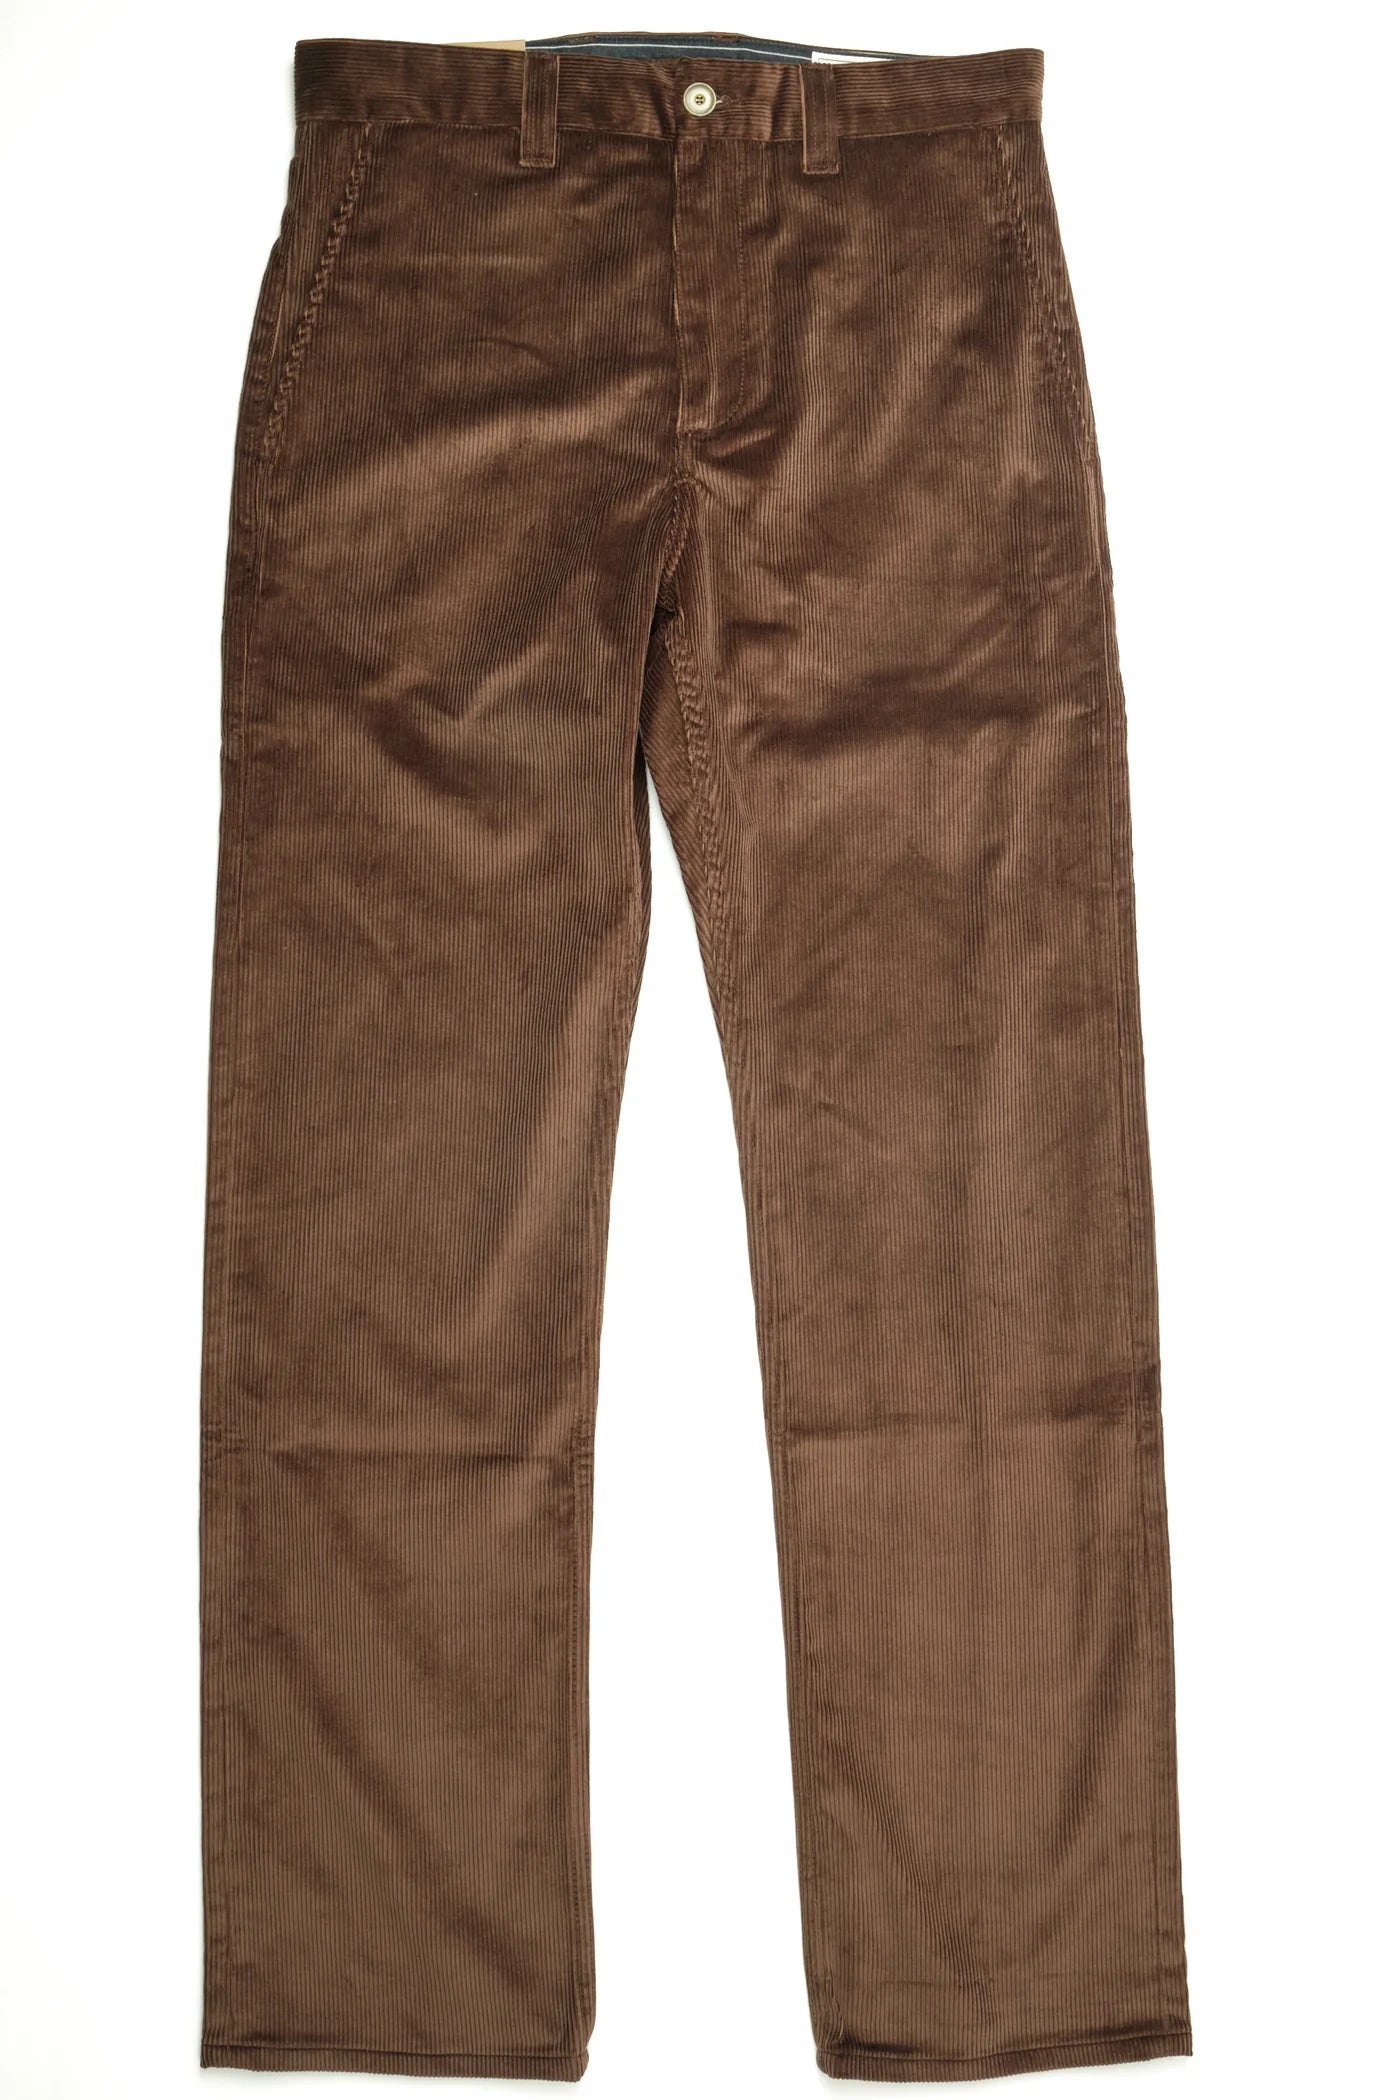 Freenote Cloth Deck Pant in Chocolate Corduroy